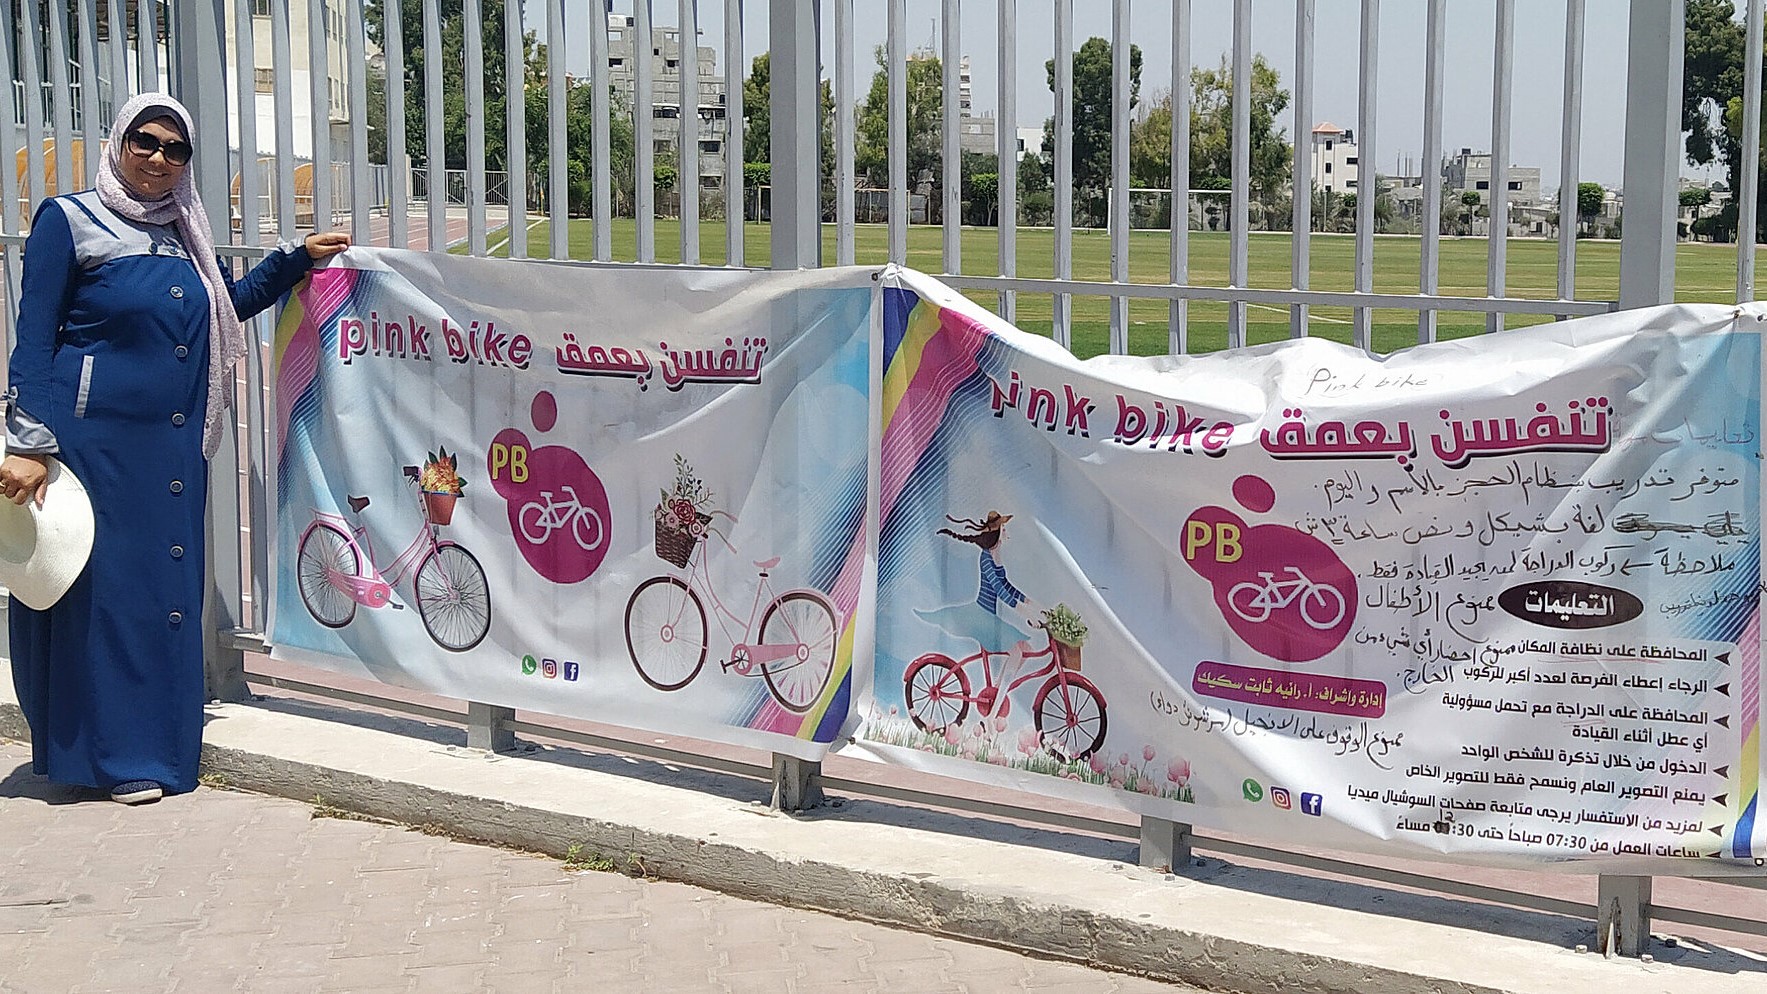 Many women are not able to ride a bicycle. Rania wanted women to experience the freedom to cycle, so she founded "pink bike" (photo: Samar Abou Elouf)